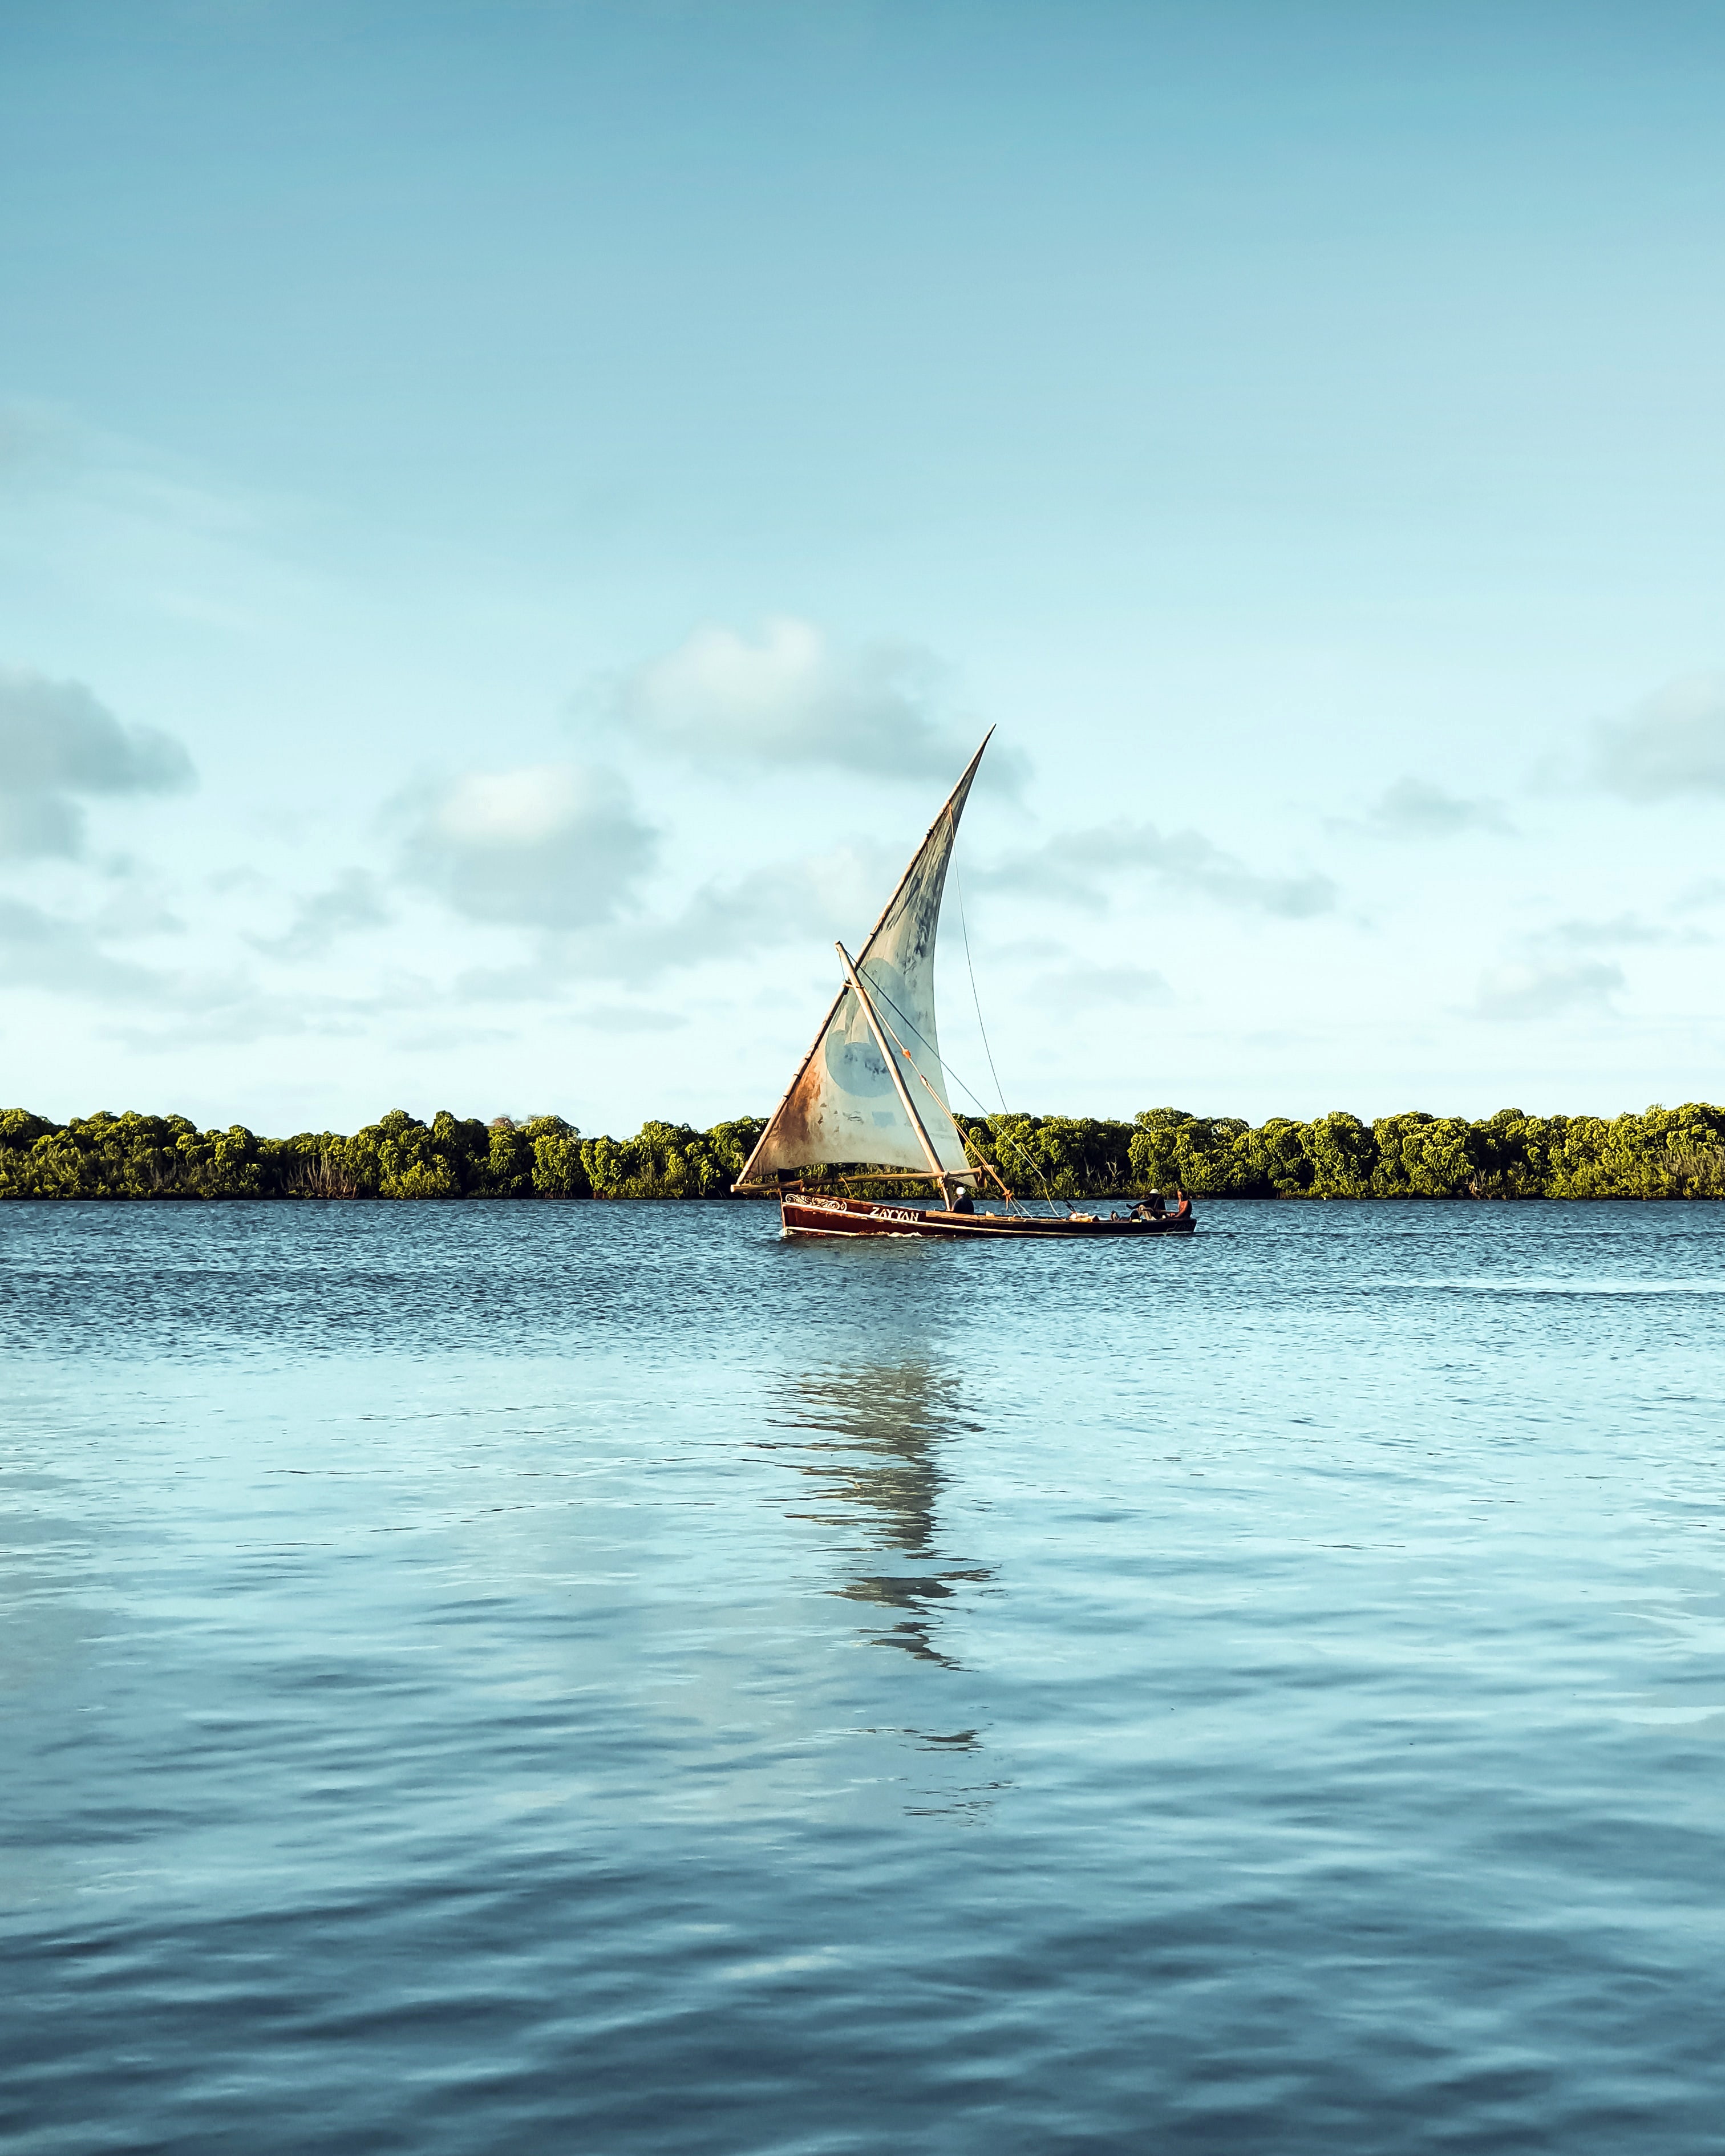 Lamu Island, located off the northeastern coast of Kenya, is easily one of the dreamiest <a href="https://www.cntraveler.com/gallery/safari-to-beach-trips-to-book?mbid=synd_msn_rss&utm_source=msn&utm_medium=syndication">beach destinations in Africa</a>—thanks in large part to the fact that you won’t hear a single car horn or breathe in any puffs of exhaust here. Folks on the island usually traverse by foot or donkey, but we recommend doing a little island hopping aboard a traditional dhow.<p>Sign up to receive the latest news, expert tips, and inspiration on all things travel</p><a href="https://www.cntraveler.com/newsletter/the-daily?sourceCode=msnsend">Inspire Me</a>